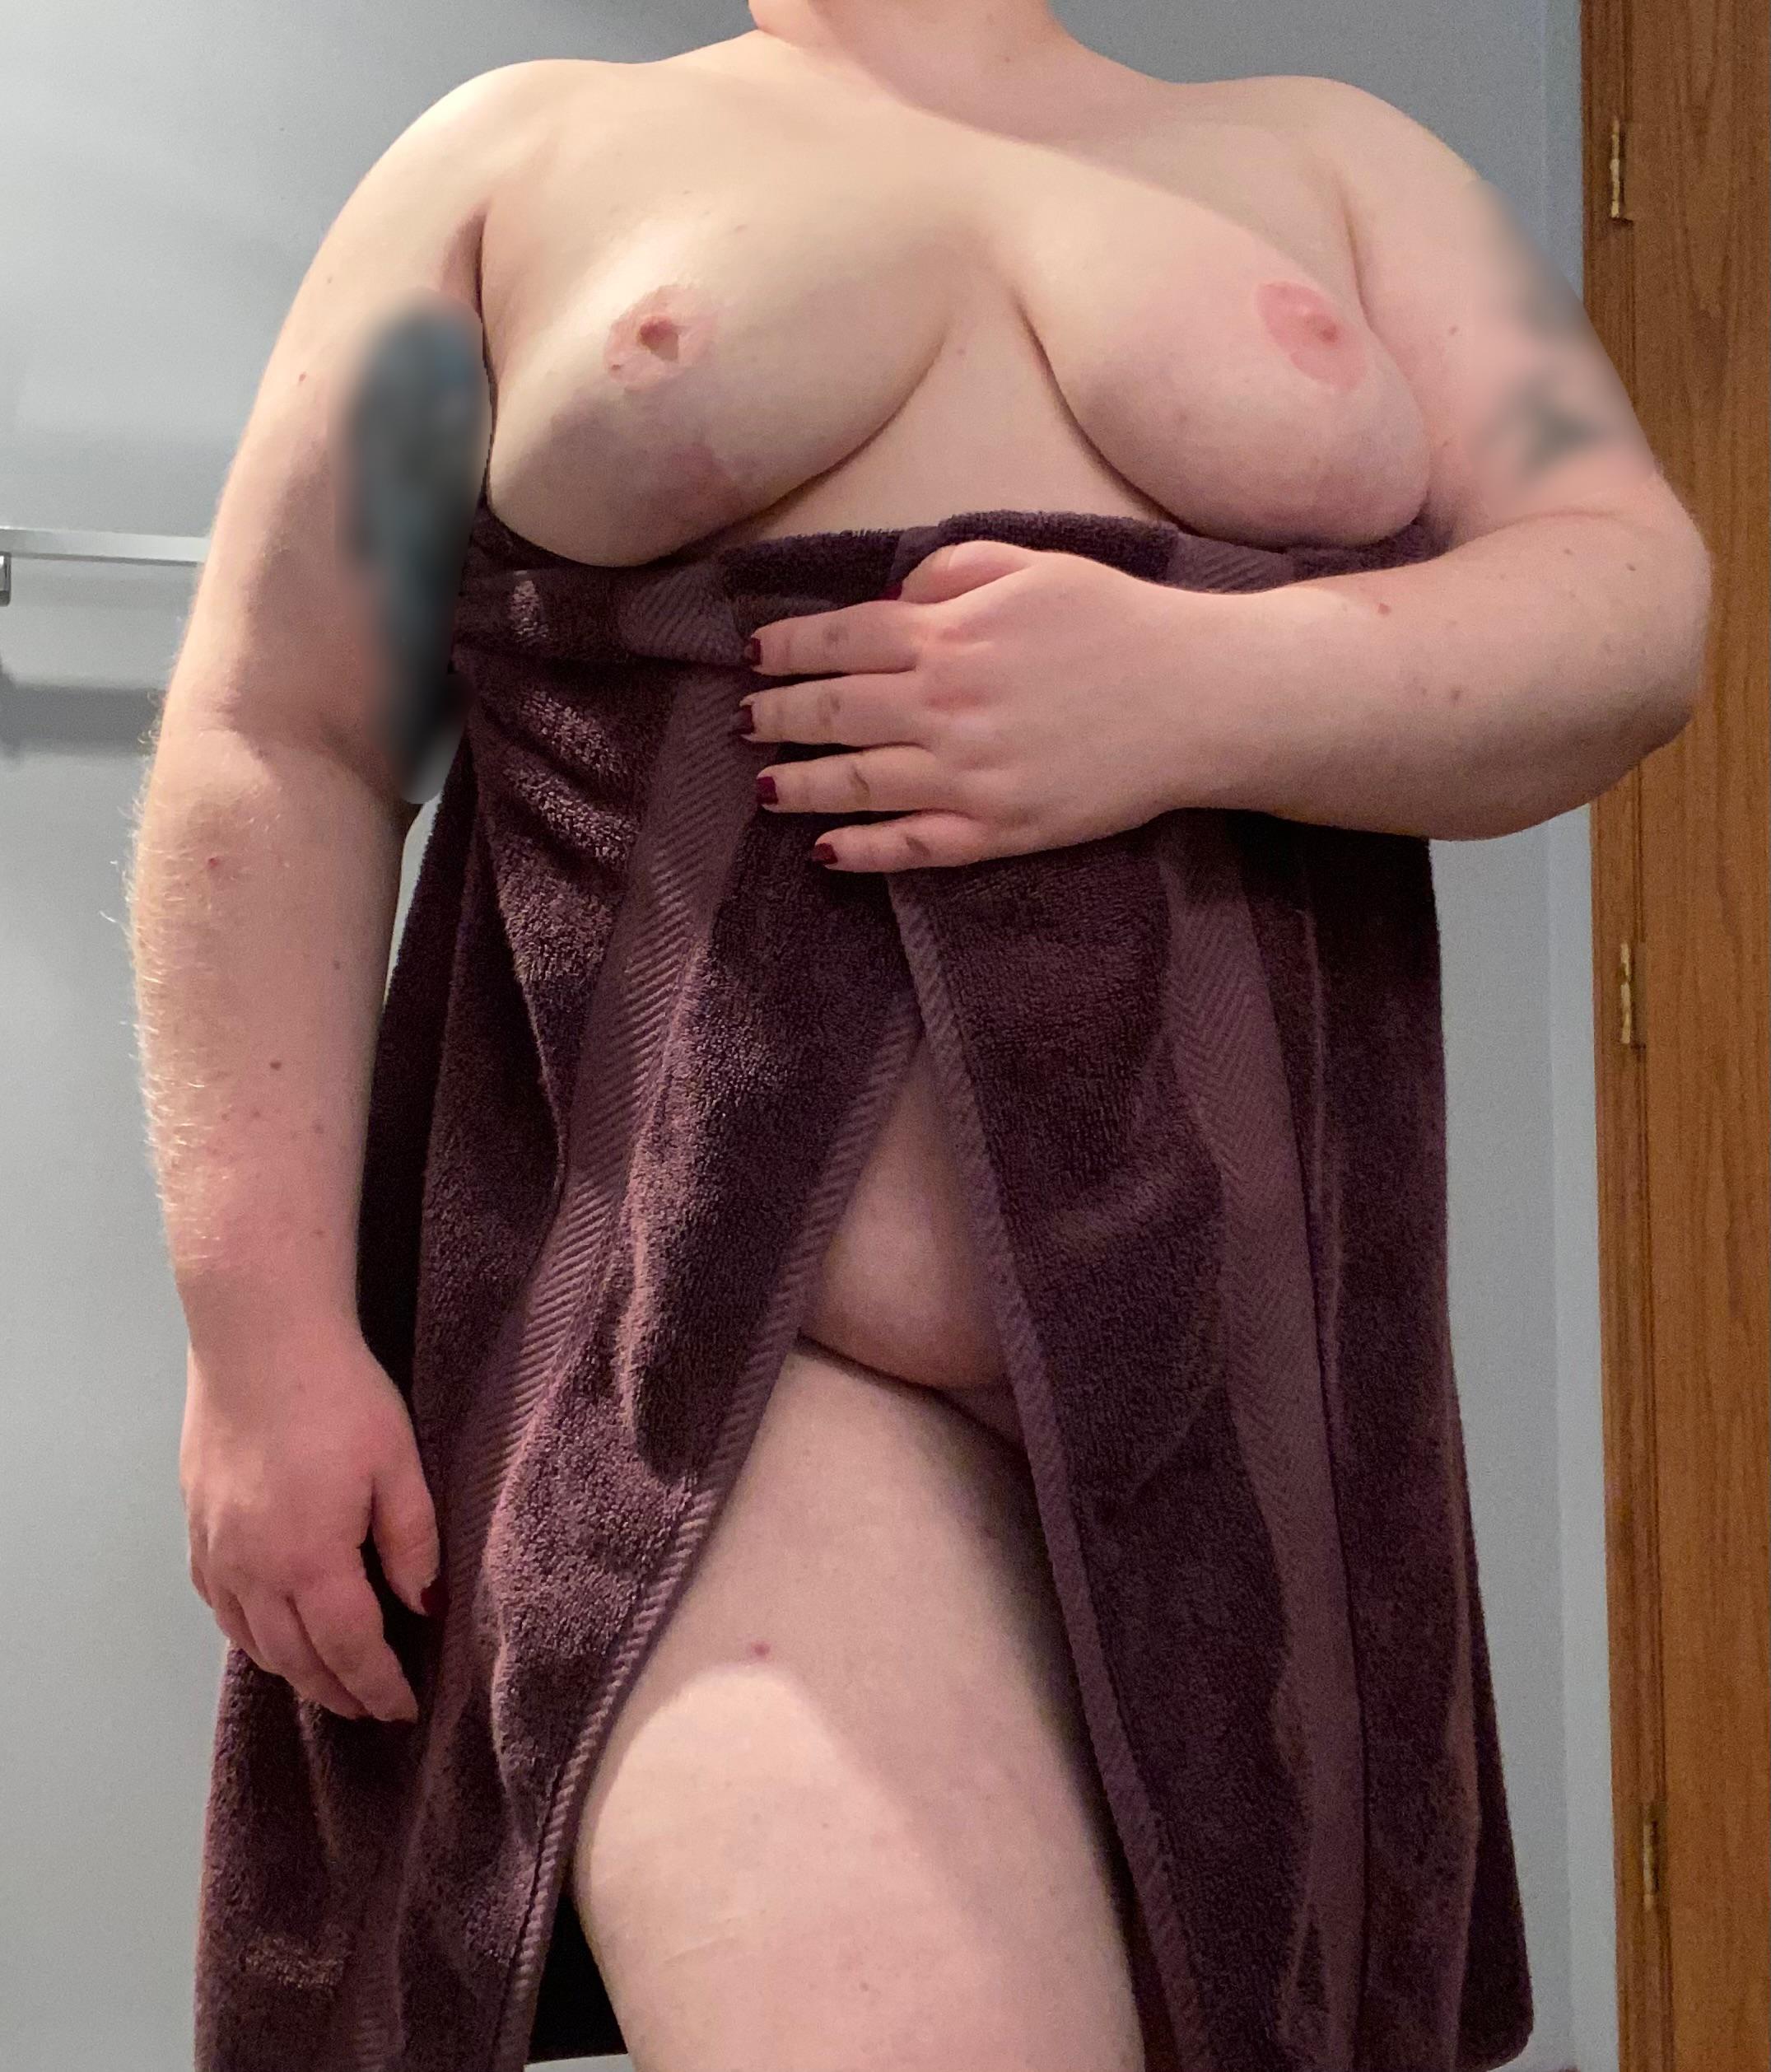 Chubby Big Tits -  Thank goodness for warm showers 😊